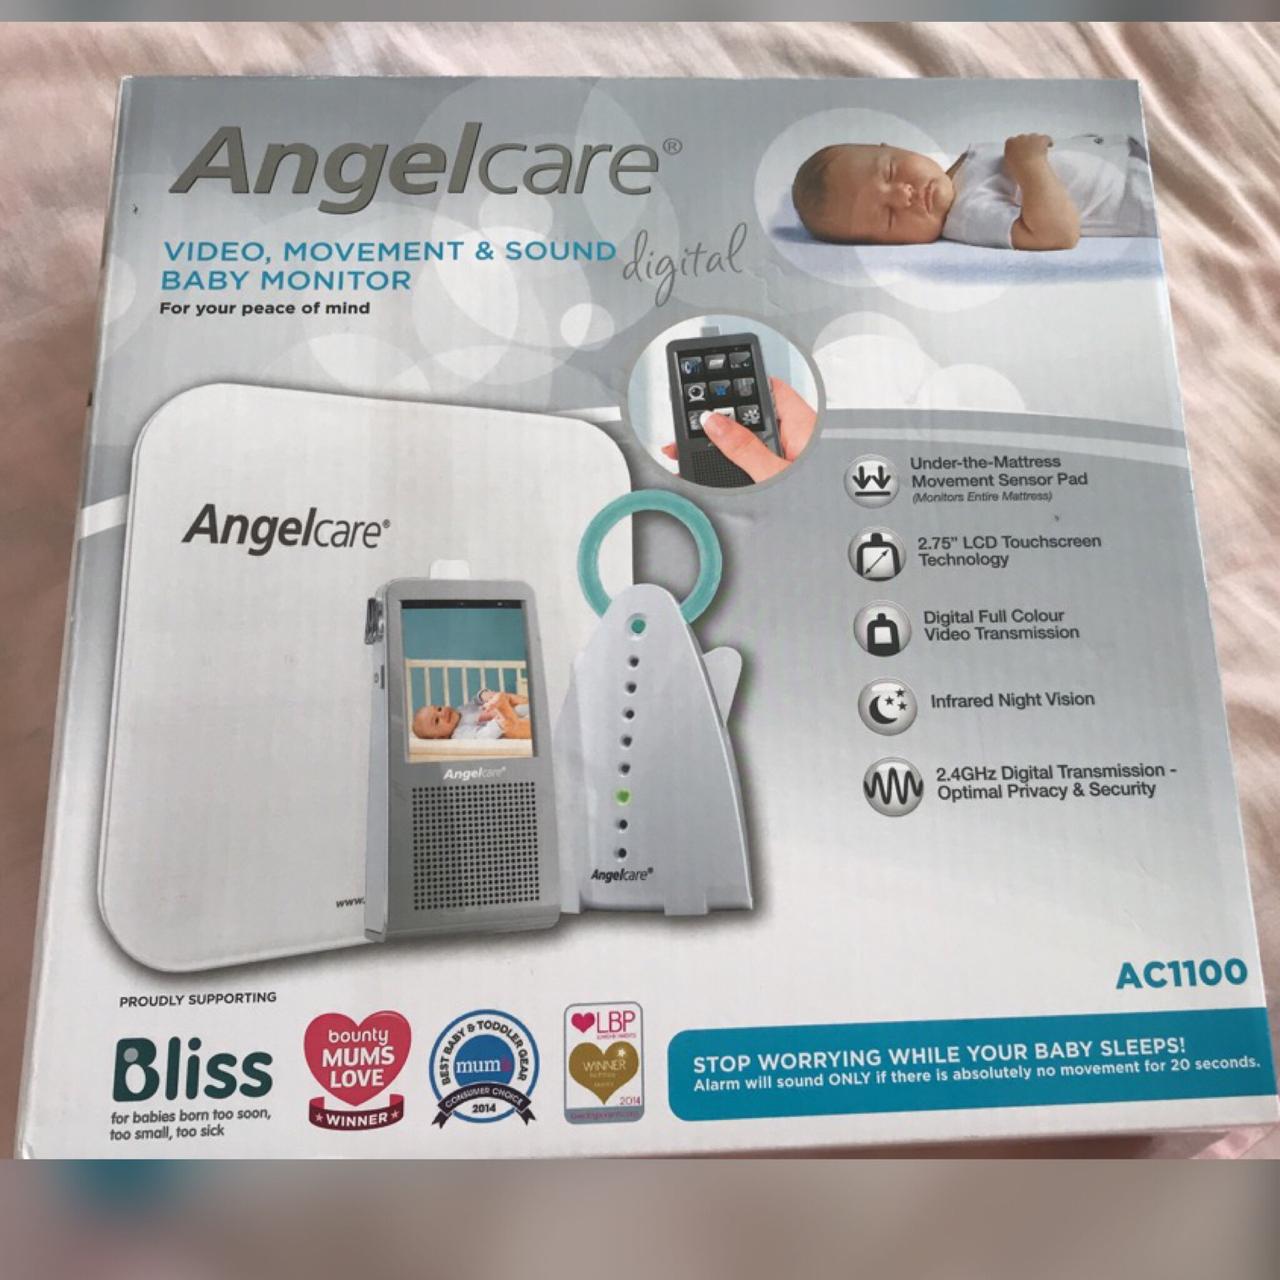 Video baby monitor - AC1100 - Angelcare - sound / movement